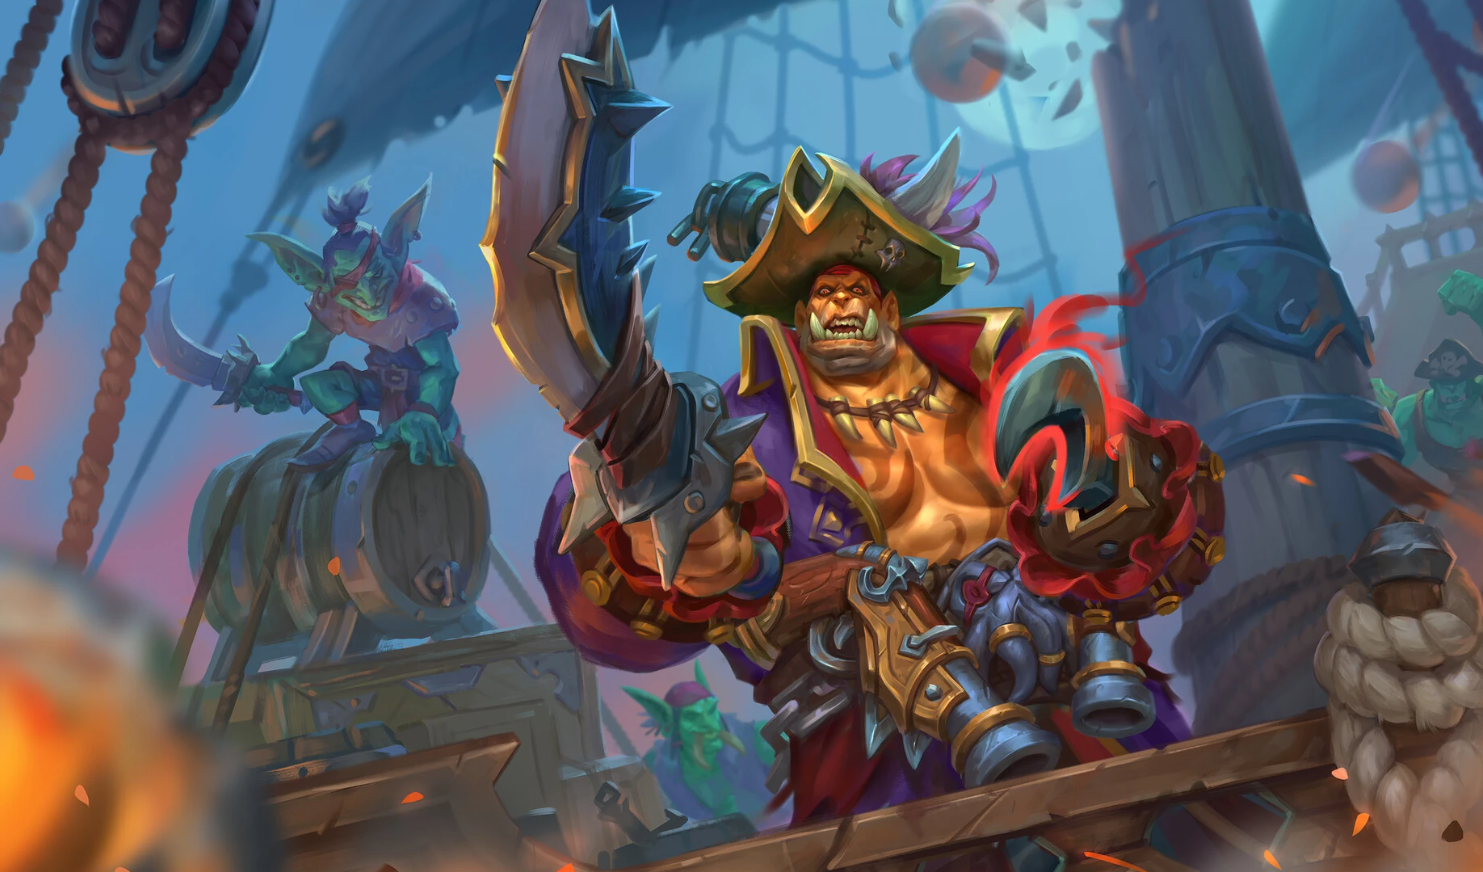 World of Warcraft Fans Disappointed as Pirates Theme Gets Denied for Next Expansion